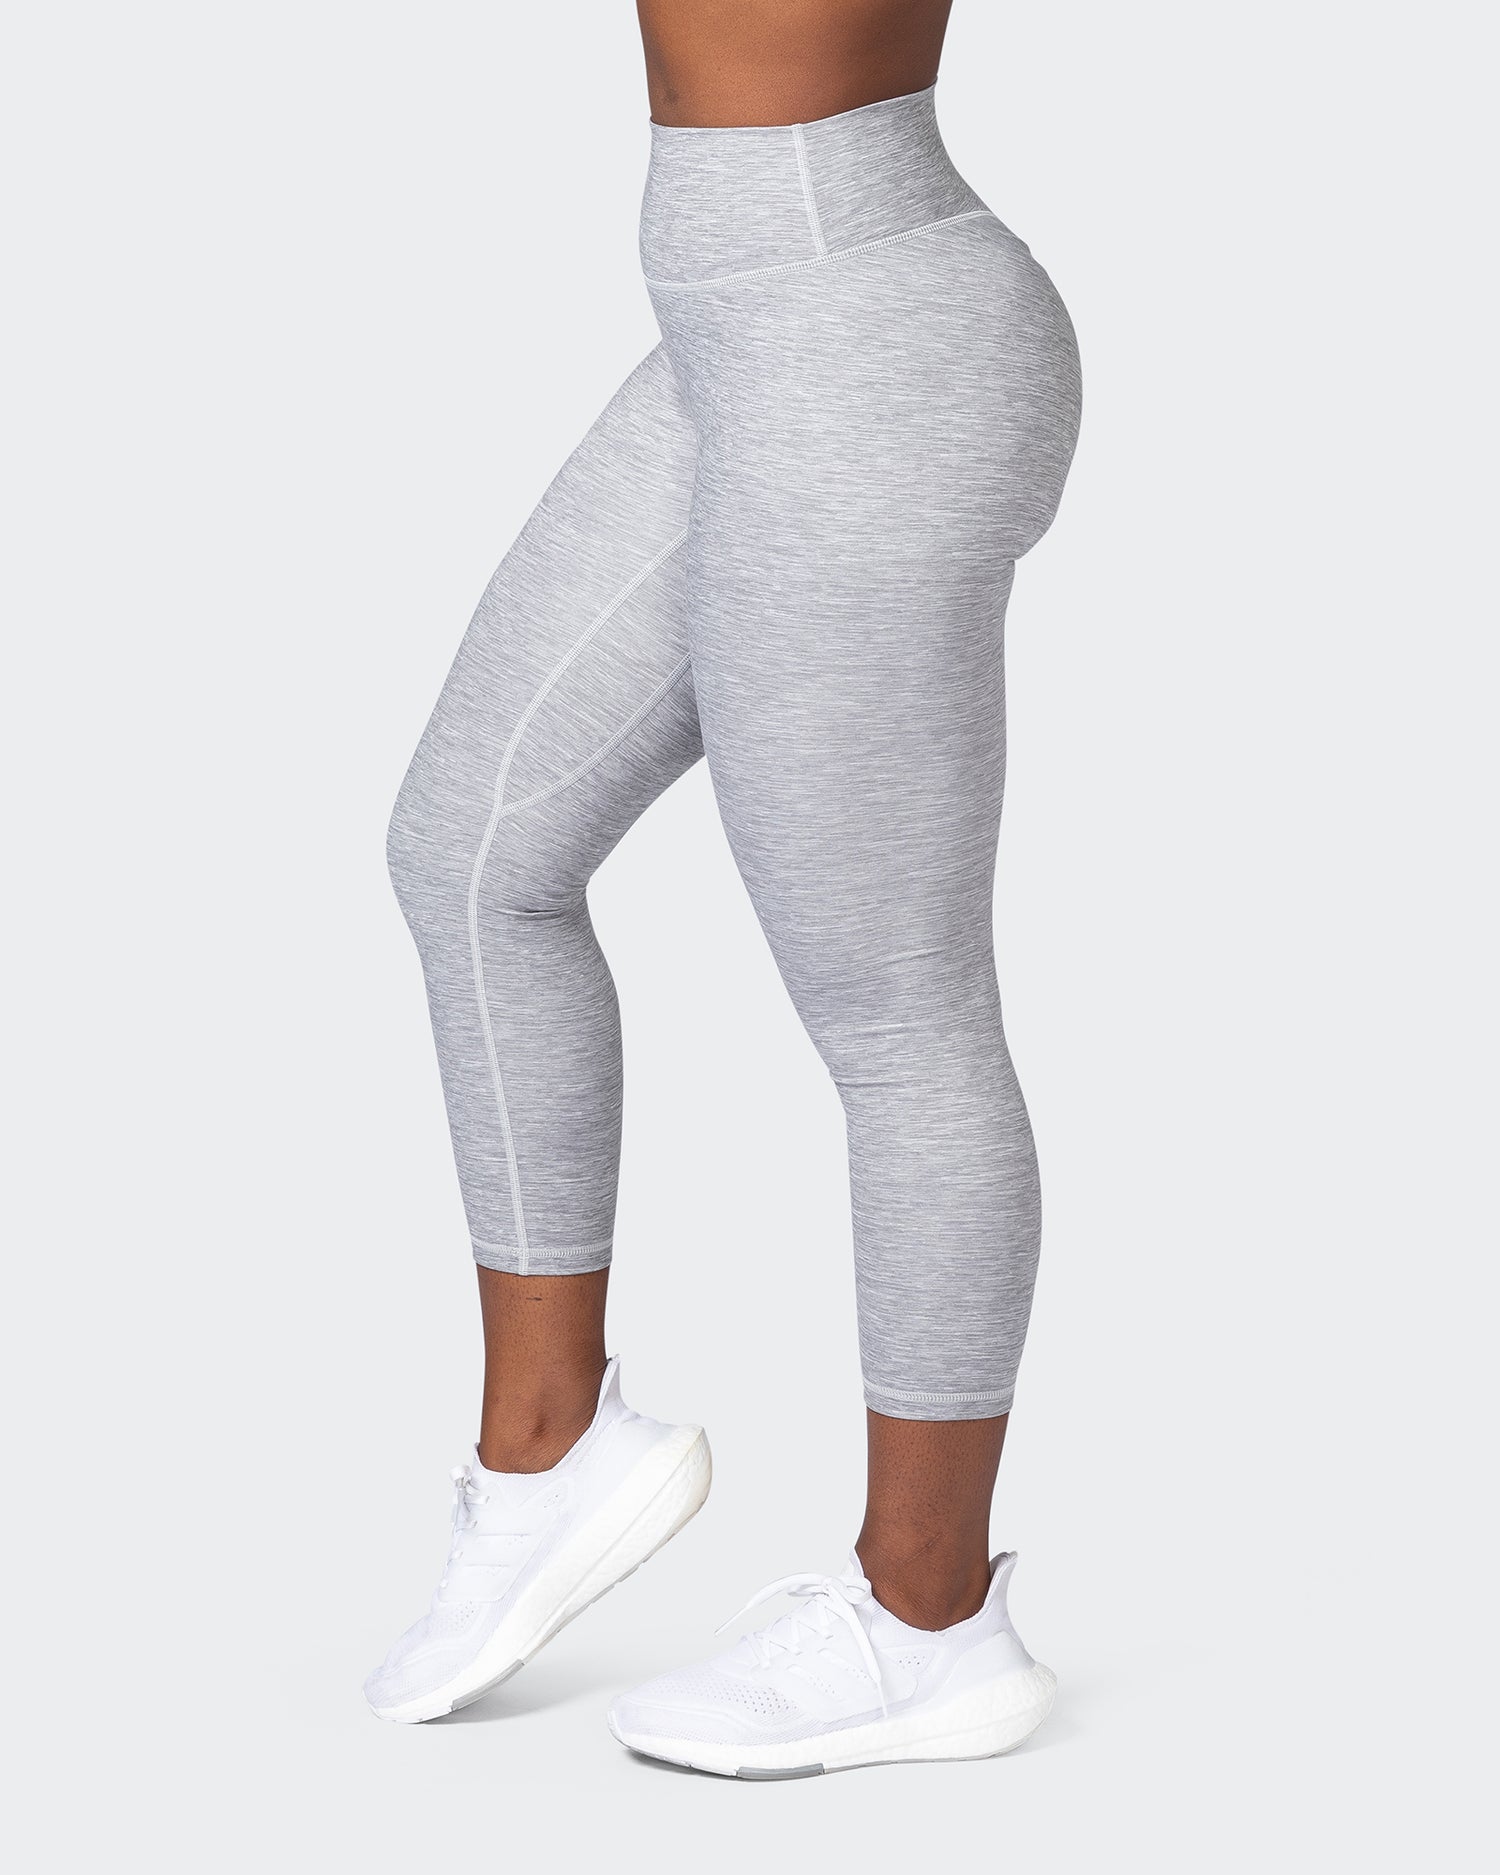 Game Changer Scrunch 7/8 Leggings - Quiet Grey Marl - Muscle Nation